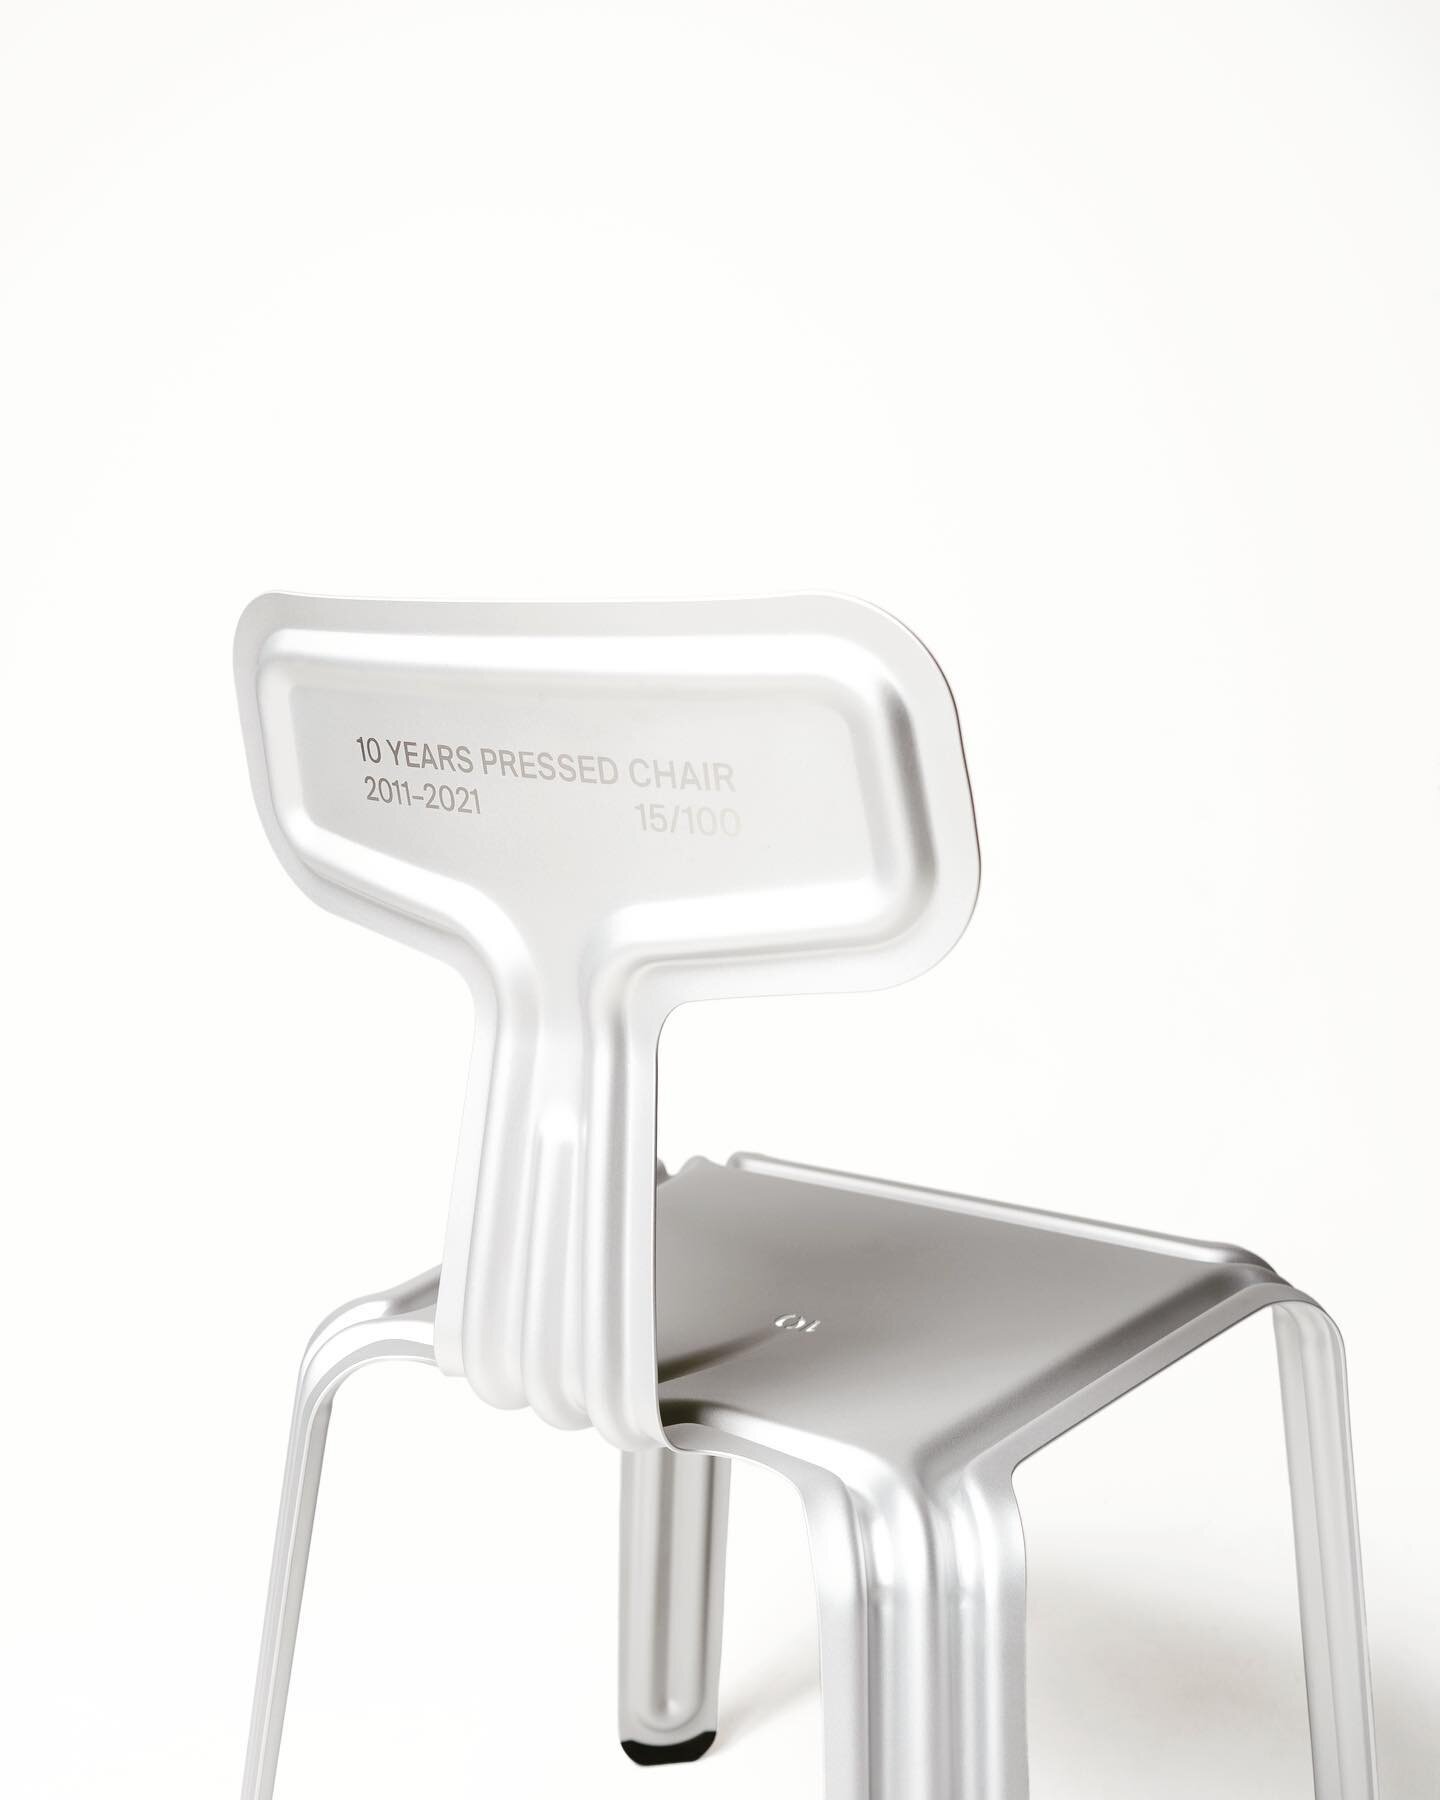 @nilsholgermoormann celebrates ten years of its #pressedchair made out of a single razor-thin aluminium sheet. Fascinating, lightweight, only 2.5 mm thin piece of aluminium designed by @harrythaler Find out more at @preklizkacom 👉 preklizka.com
#cre